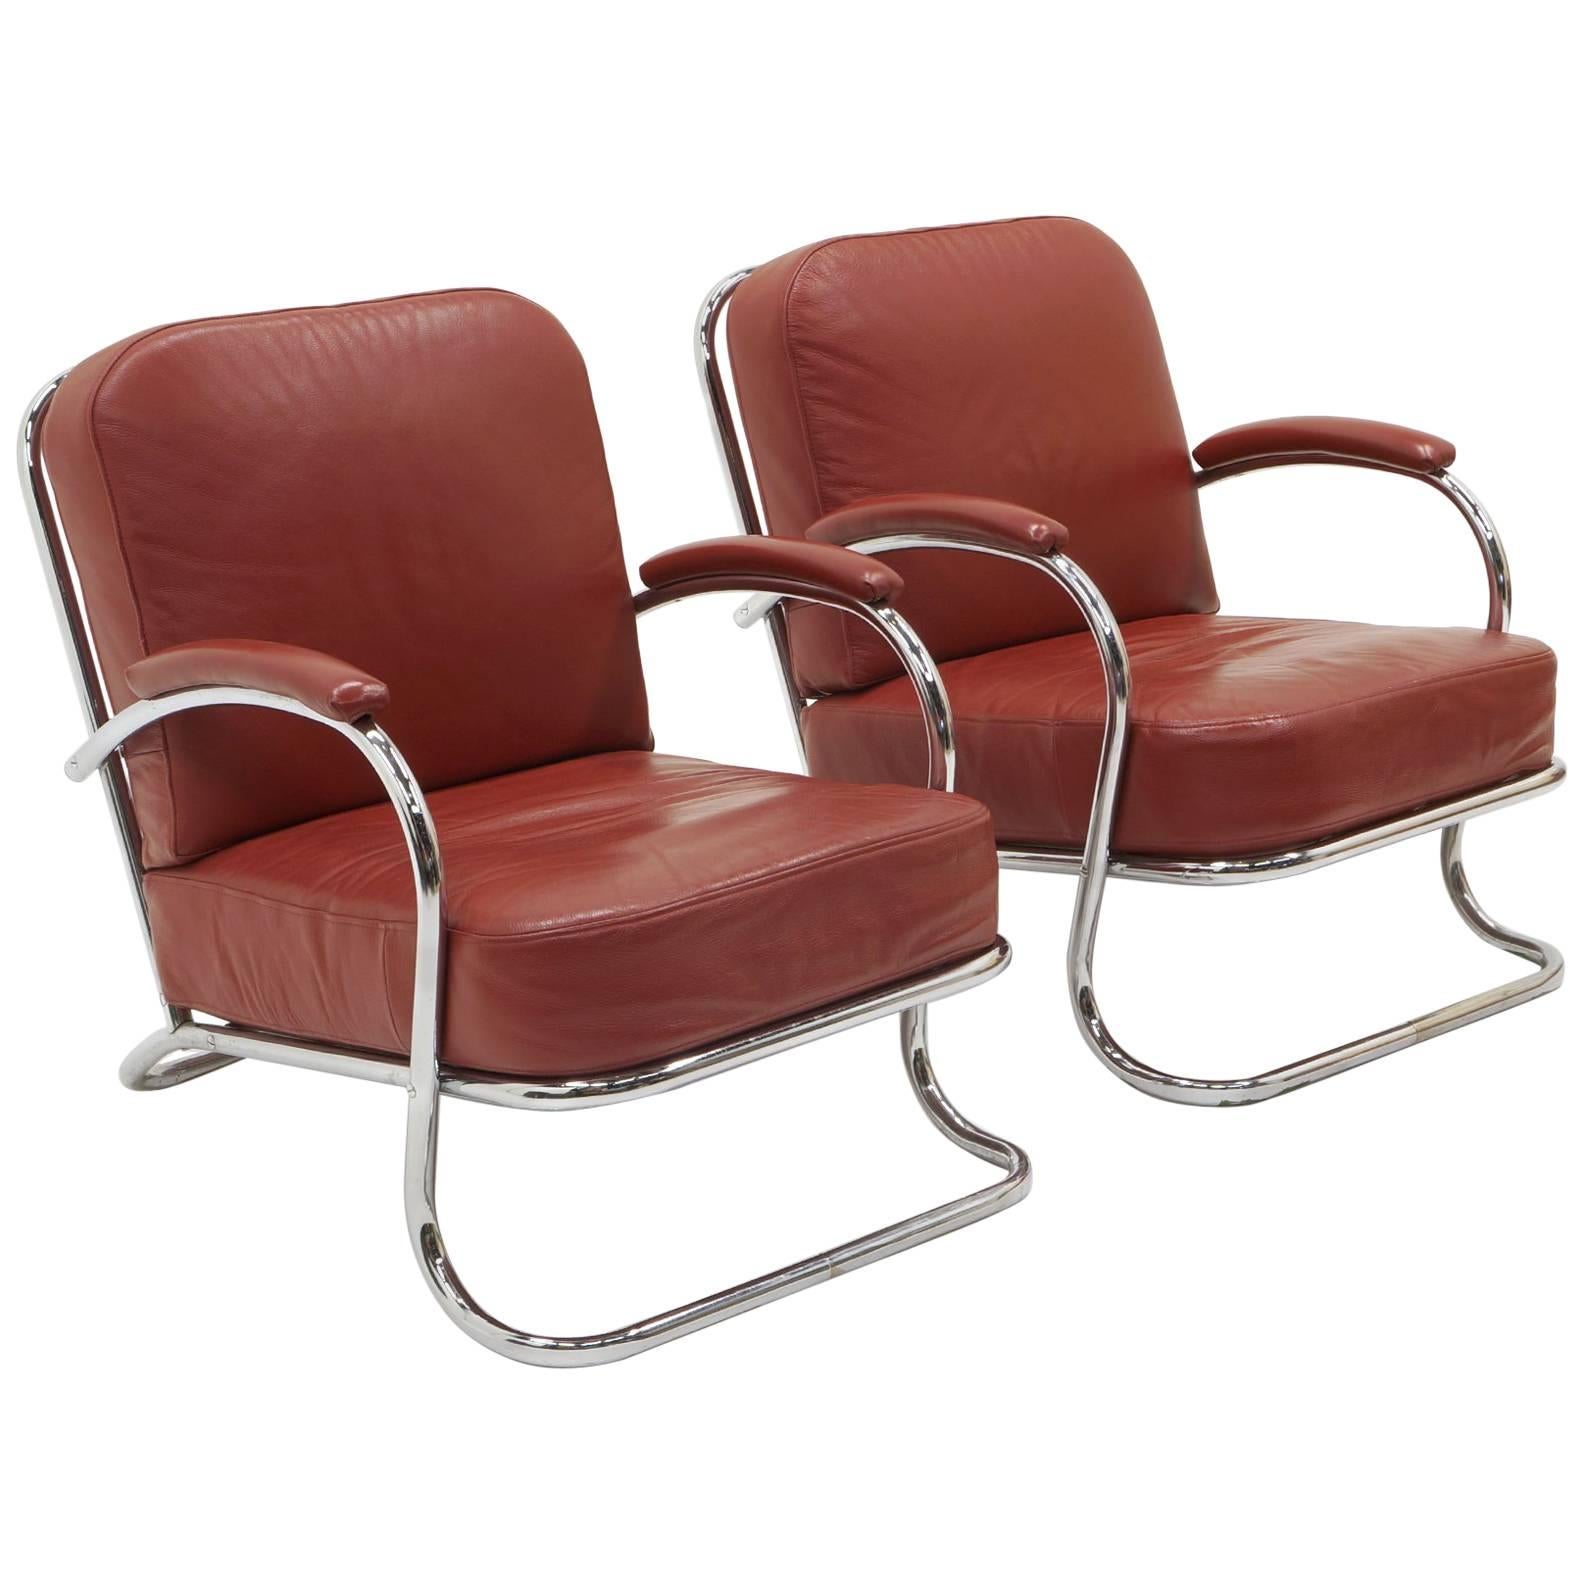 Pair of Tubular Chrome and Red Leather Lounge Chairs by KEM Weber for Lloyd